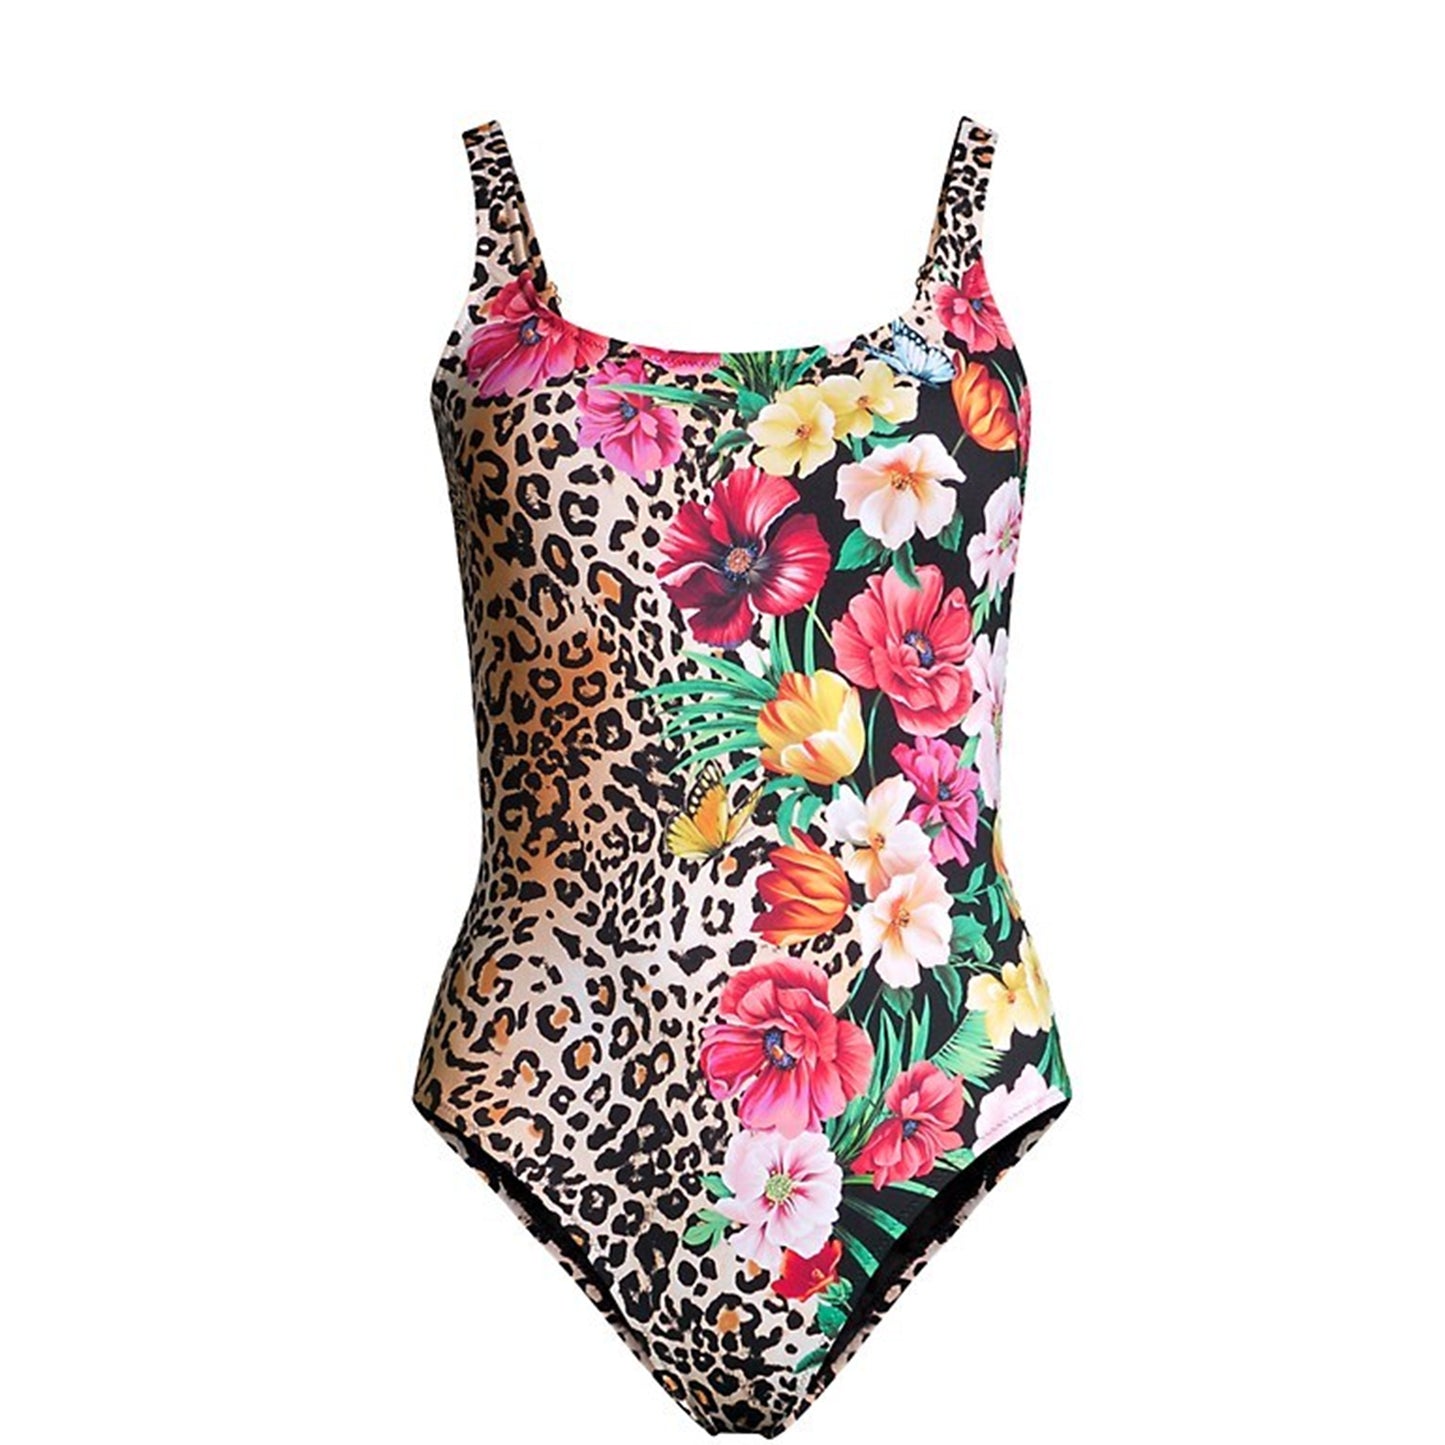 Johnny Was Sandrita One-Piece Swimsuit Floral Vibrant